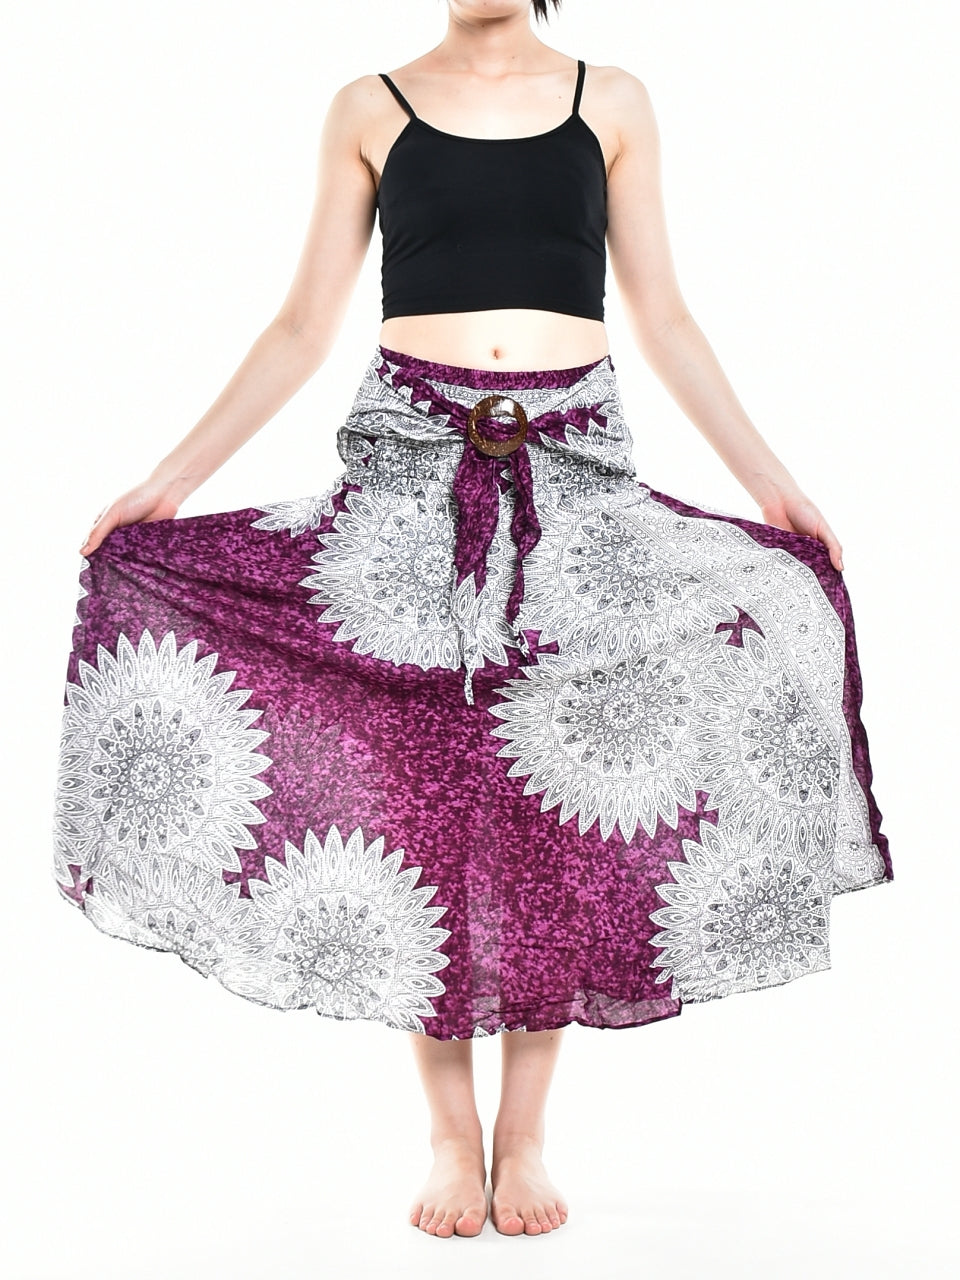 Bohotusk Purple Snowflake Long Skirt With Coconut Buckle (& Strapless Dress) S/M Only